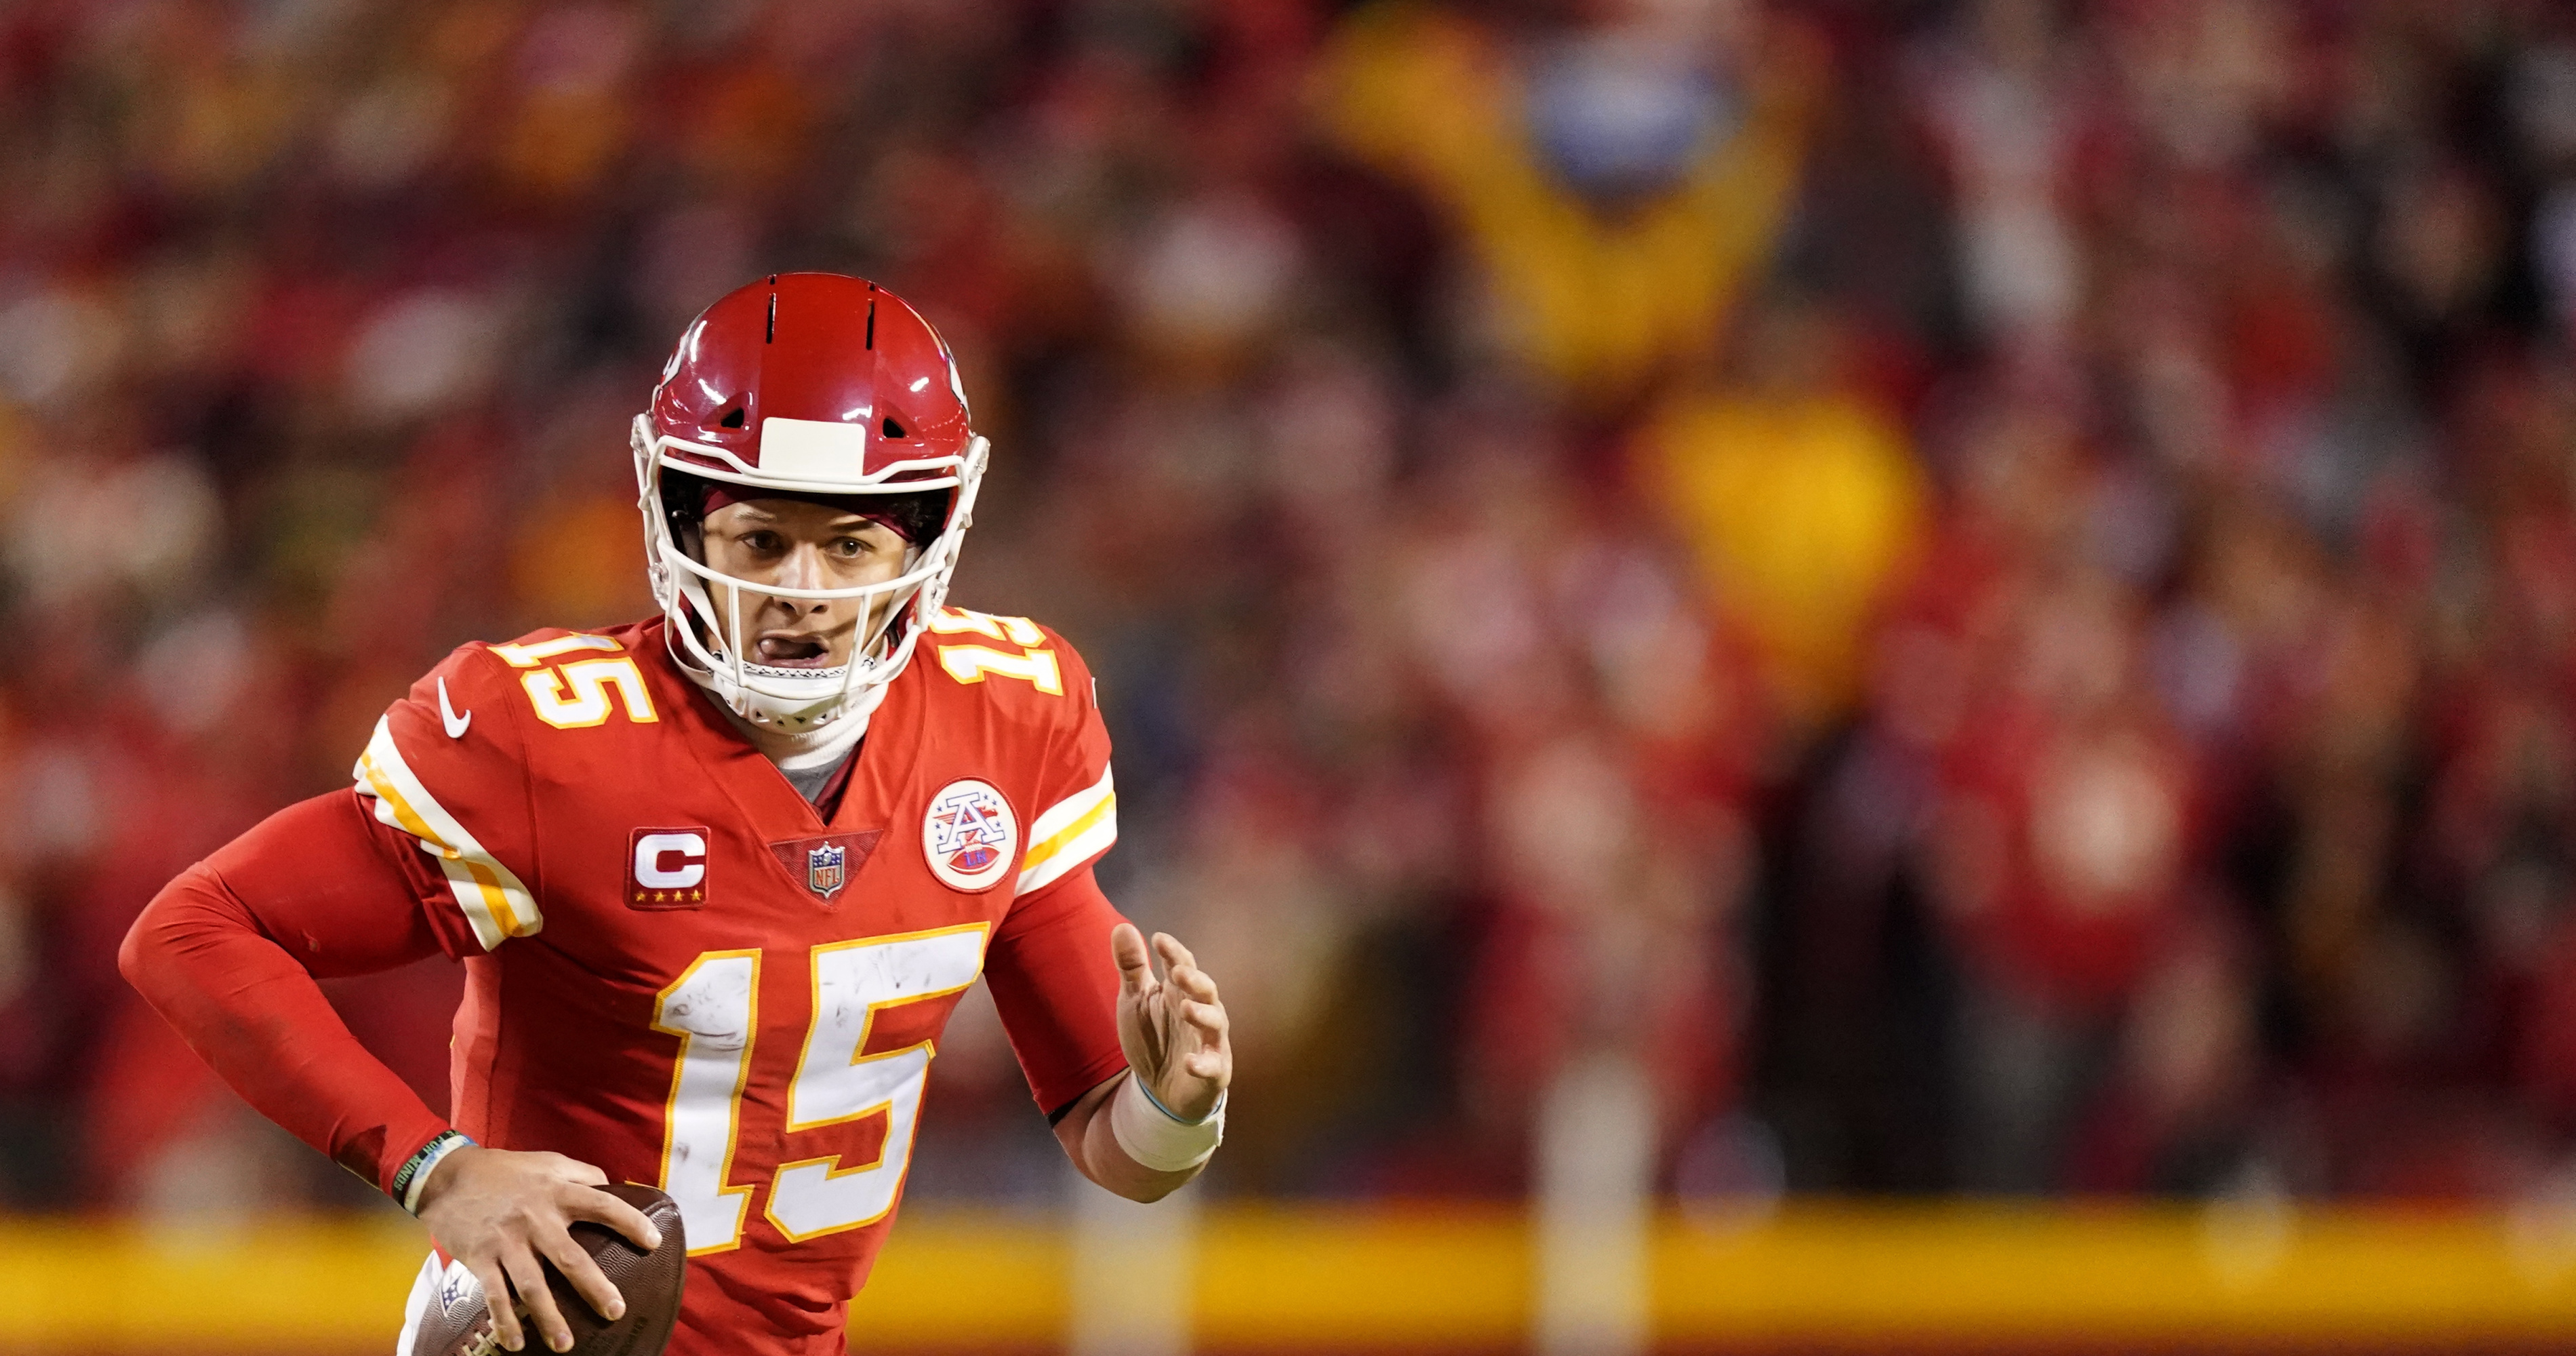 Kansas City Chiefs to host Buffalo Bills on Sunday in divisional round